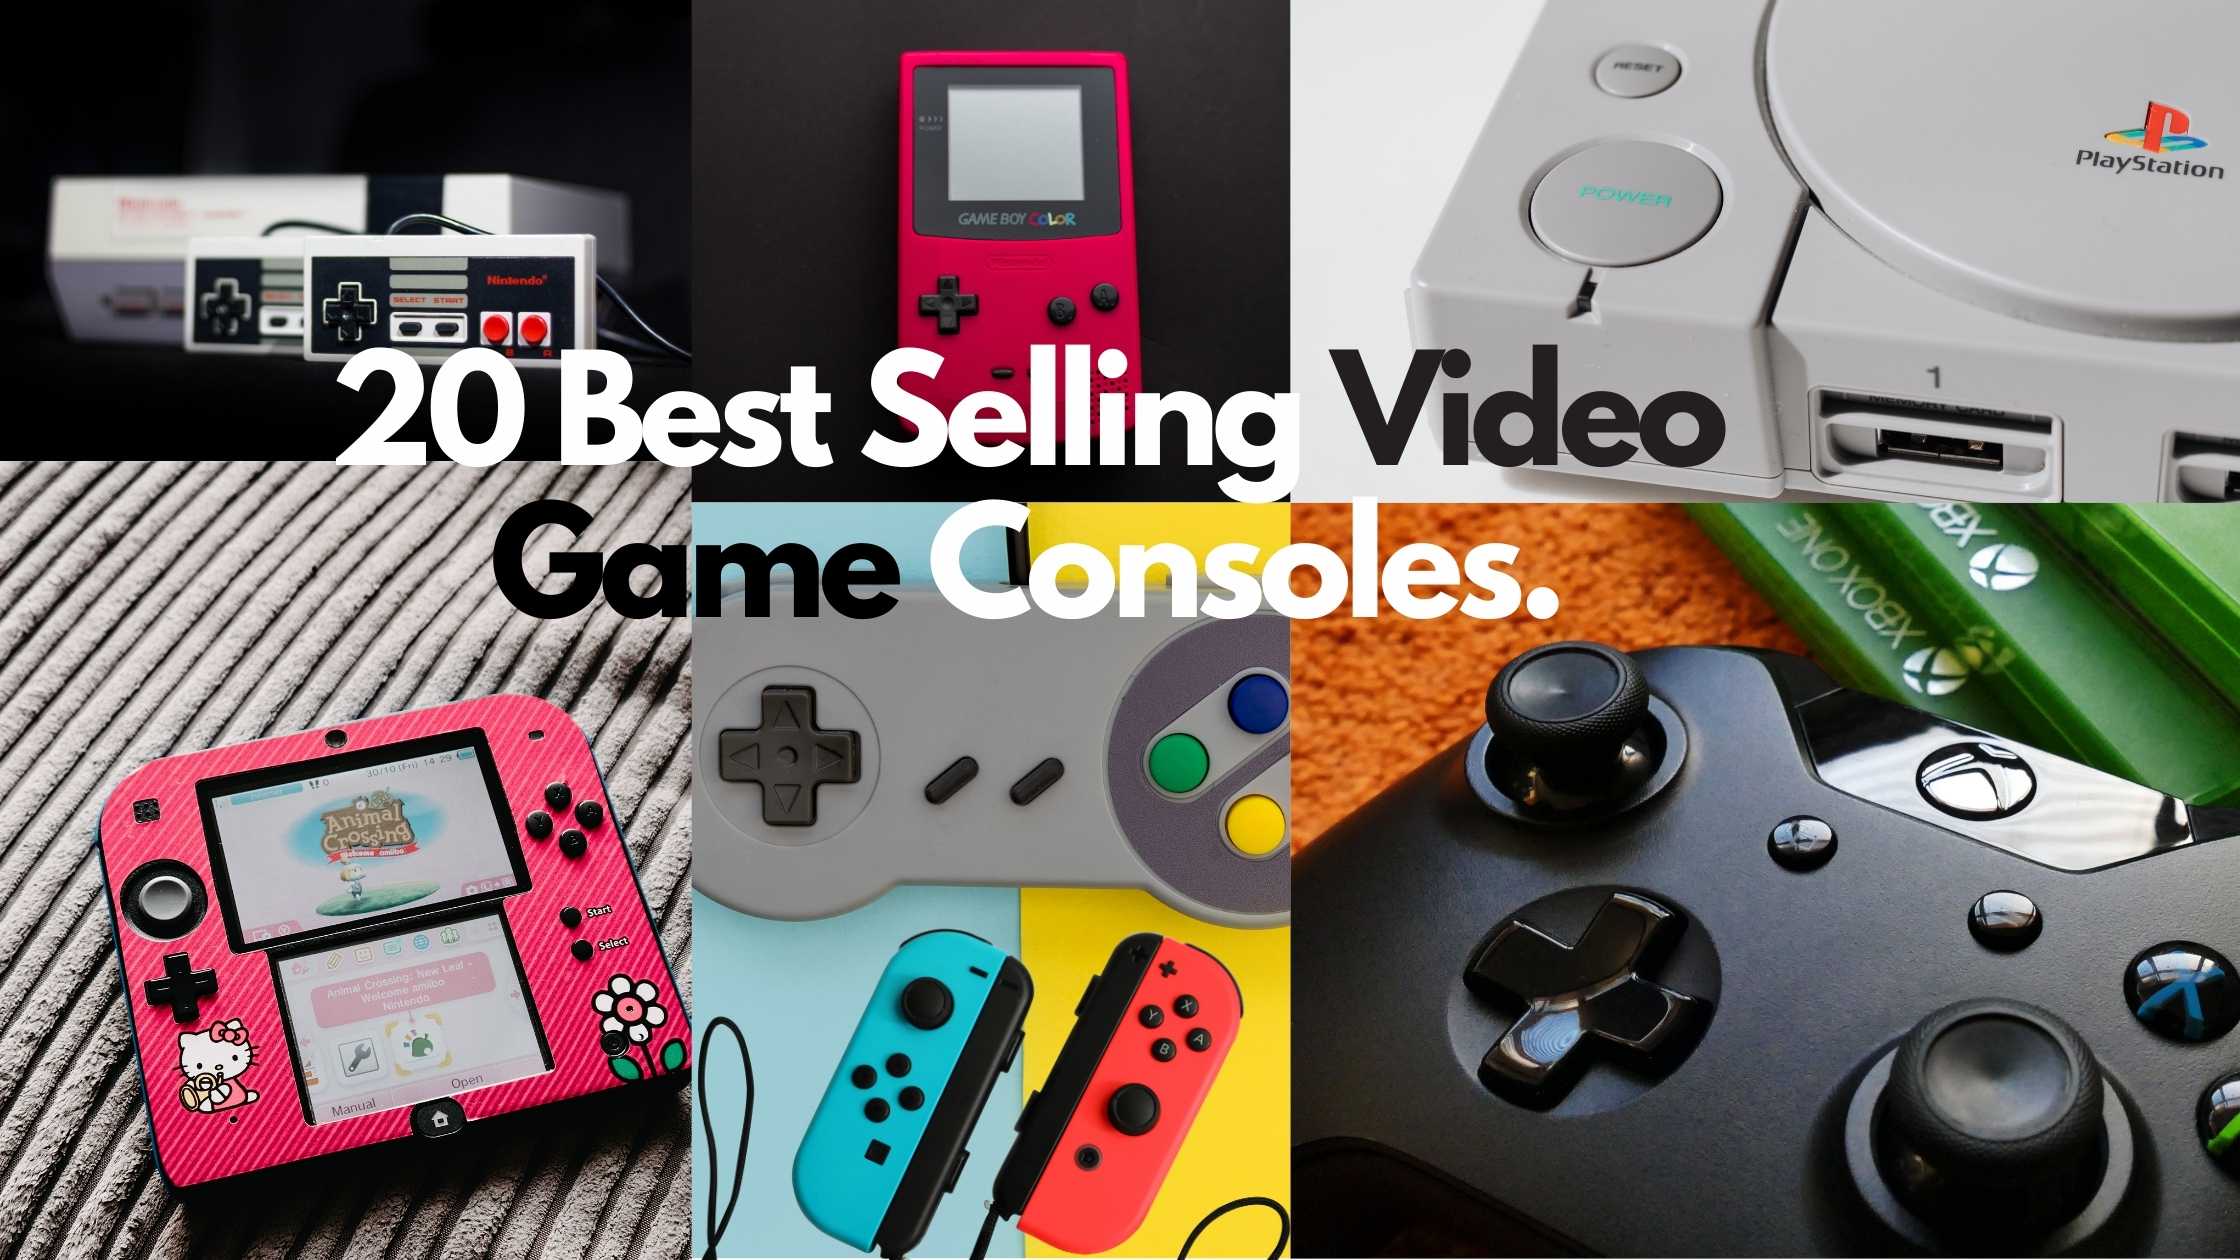 20 Best Selling Video Game Consoles Sheepbuy Blog